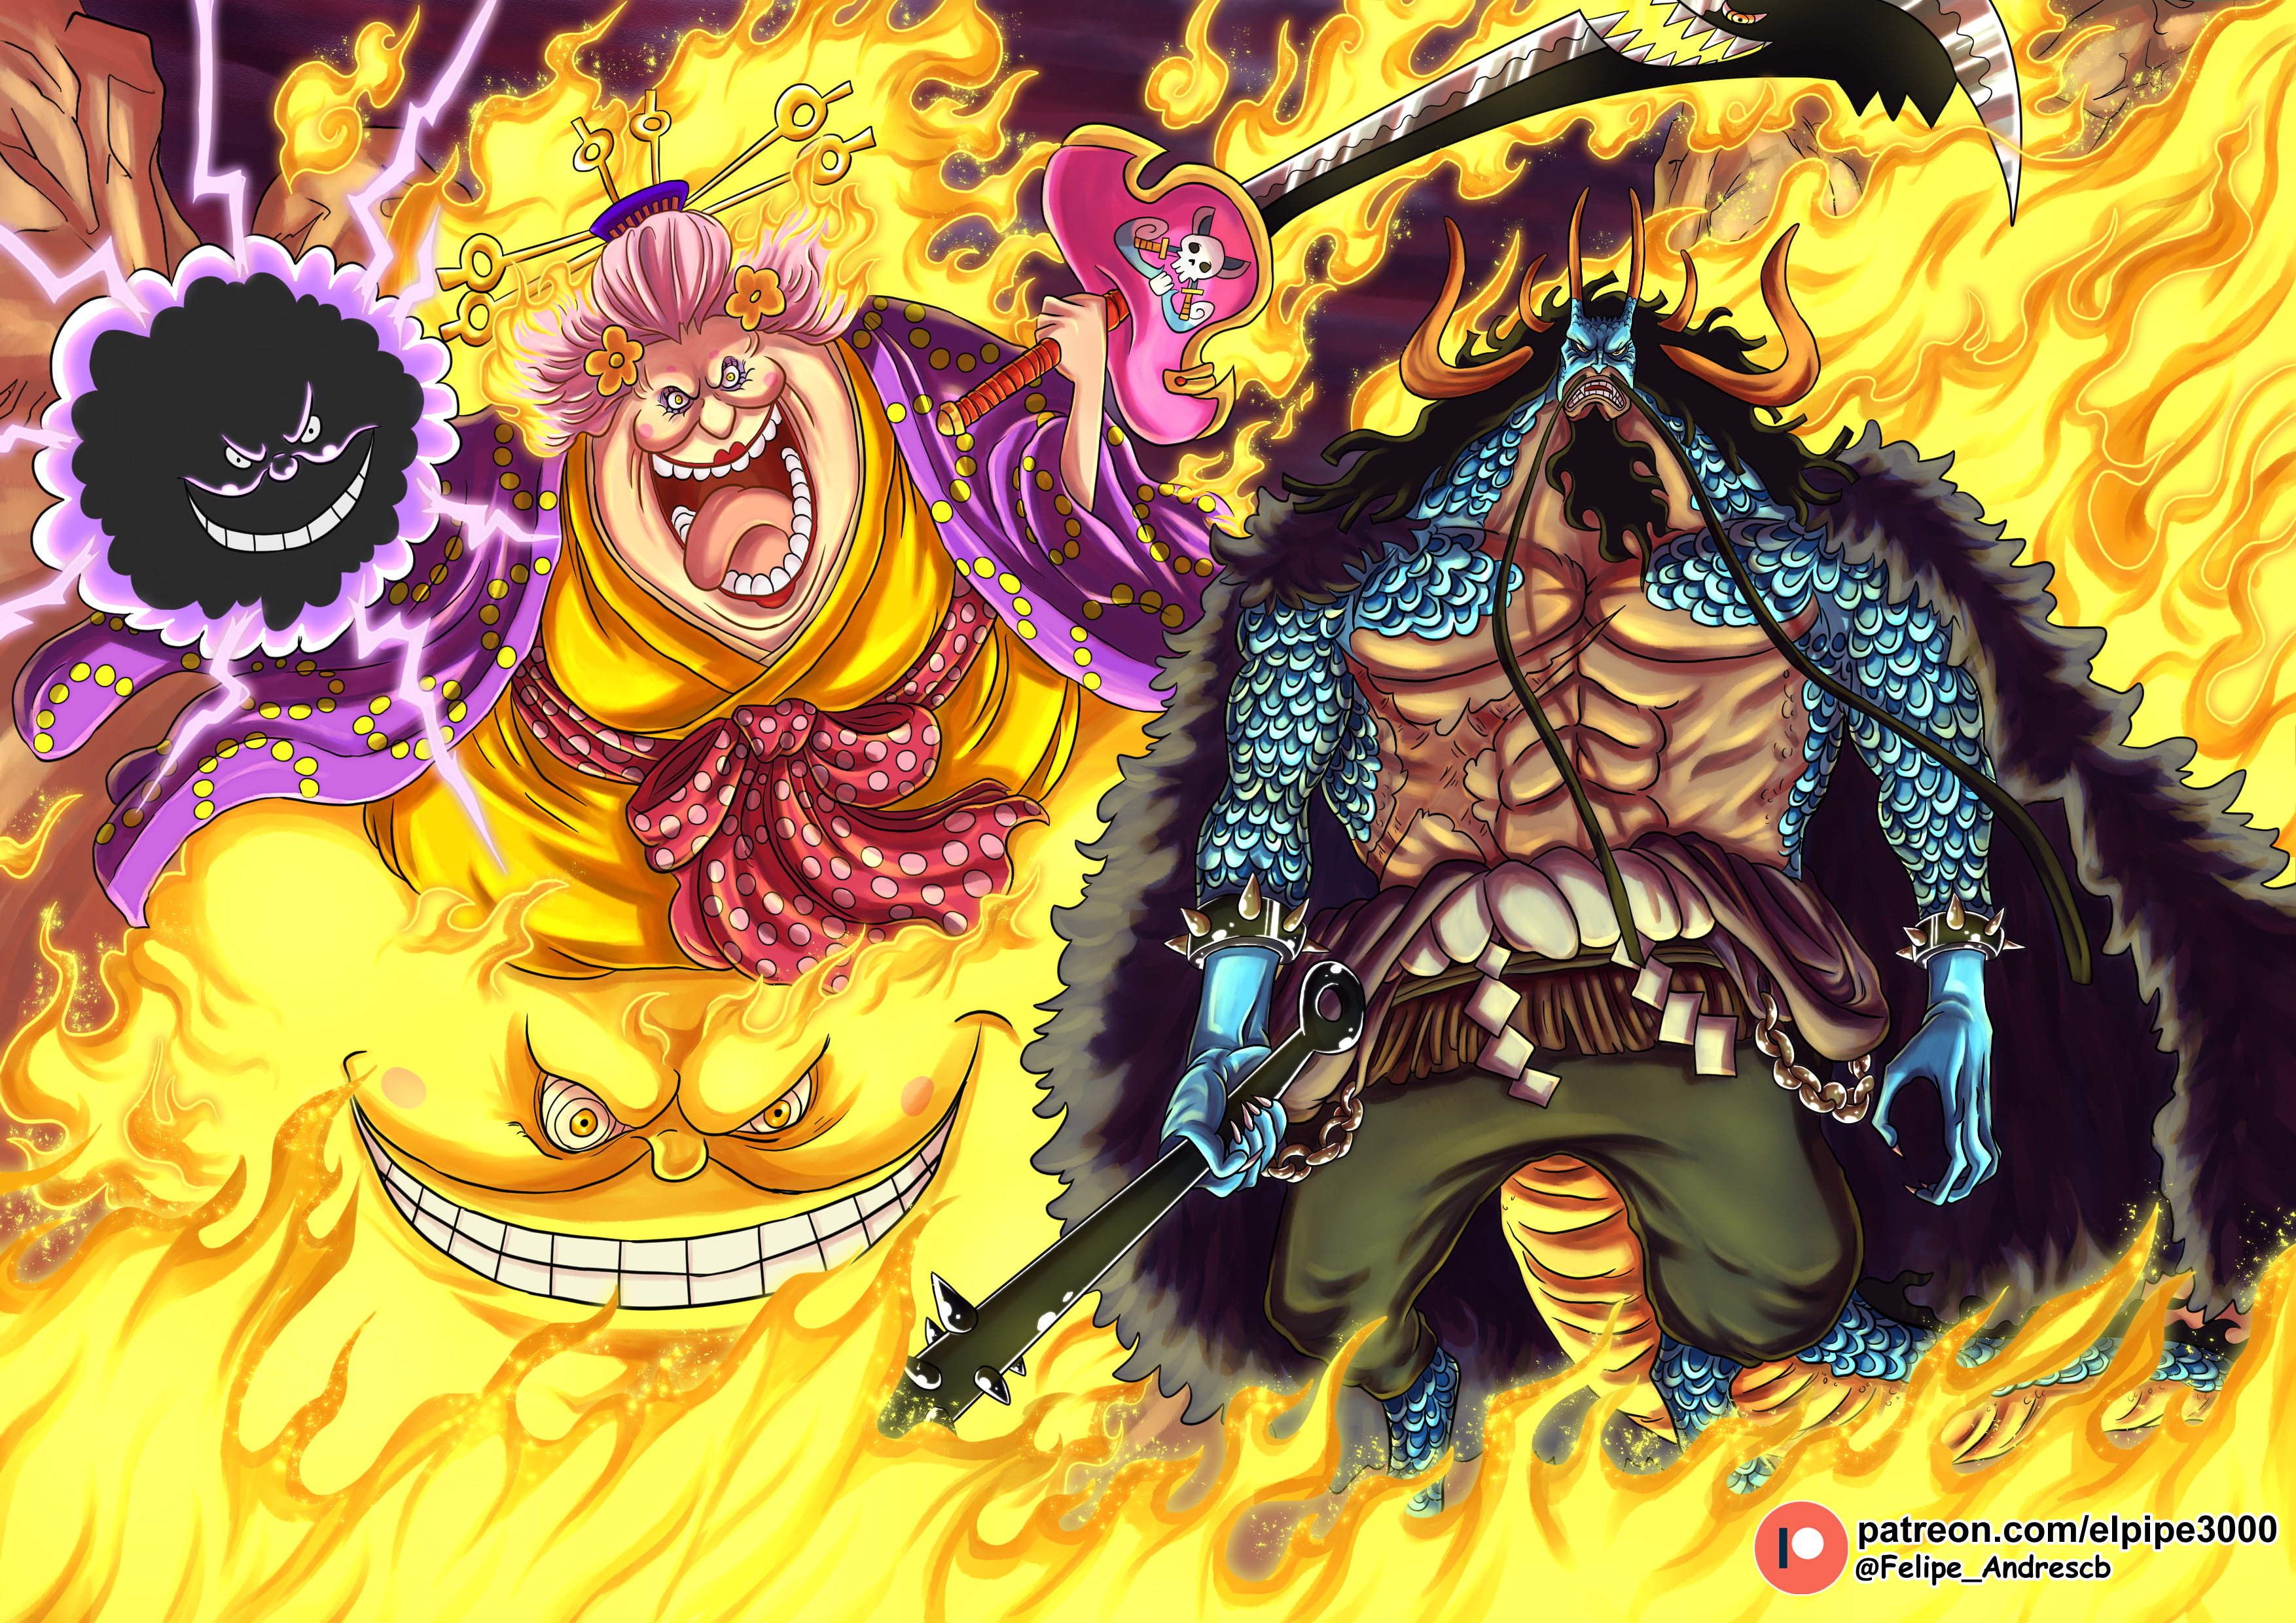 Anime One Piece HD Wallpaper by elpipe3000